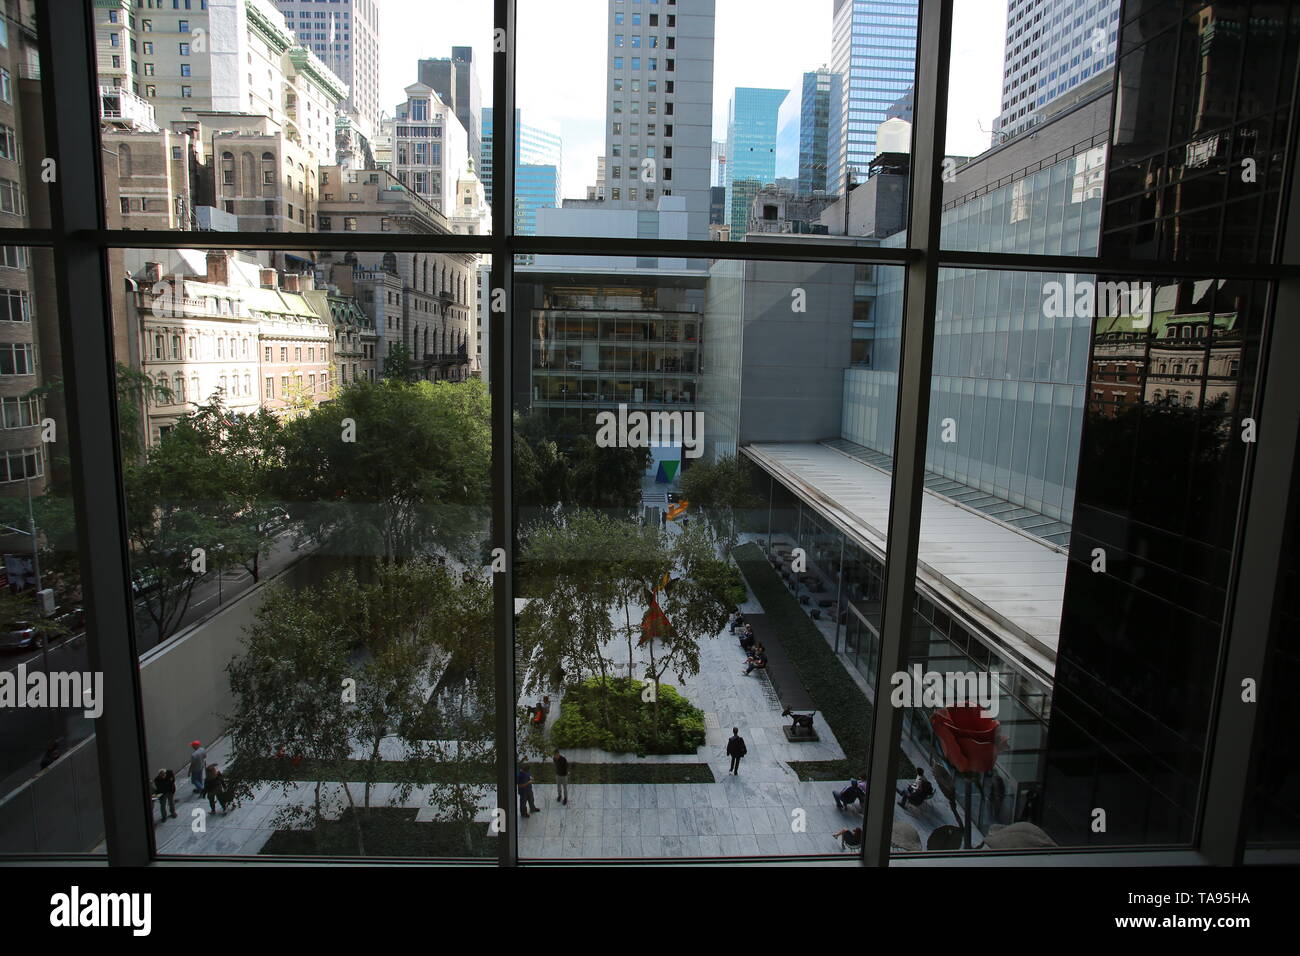 silhuet Skinnende Modernisere he modern art museum (MOMA) in New York . MoMa.it is an art museum located  in Midtown Manhattan in New York City, one of famous museum in nyc Stock  Photo - Alamy